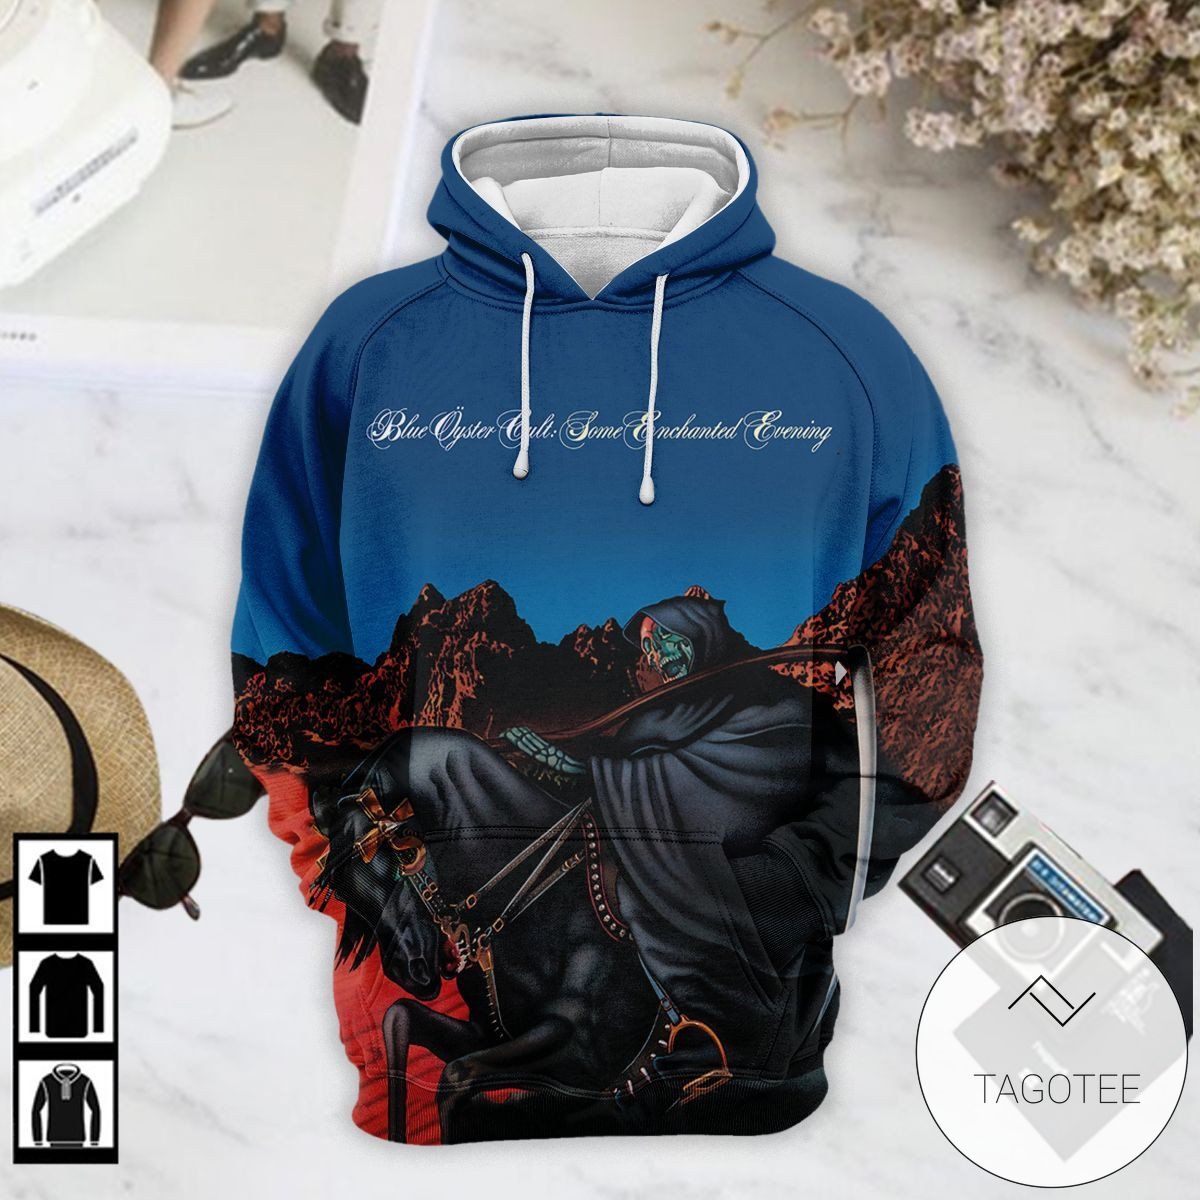 Blue Öyster Cult Some Enchanted Evening Album Cover Hoodie